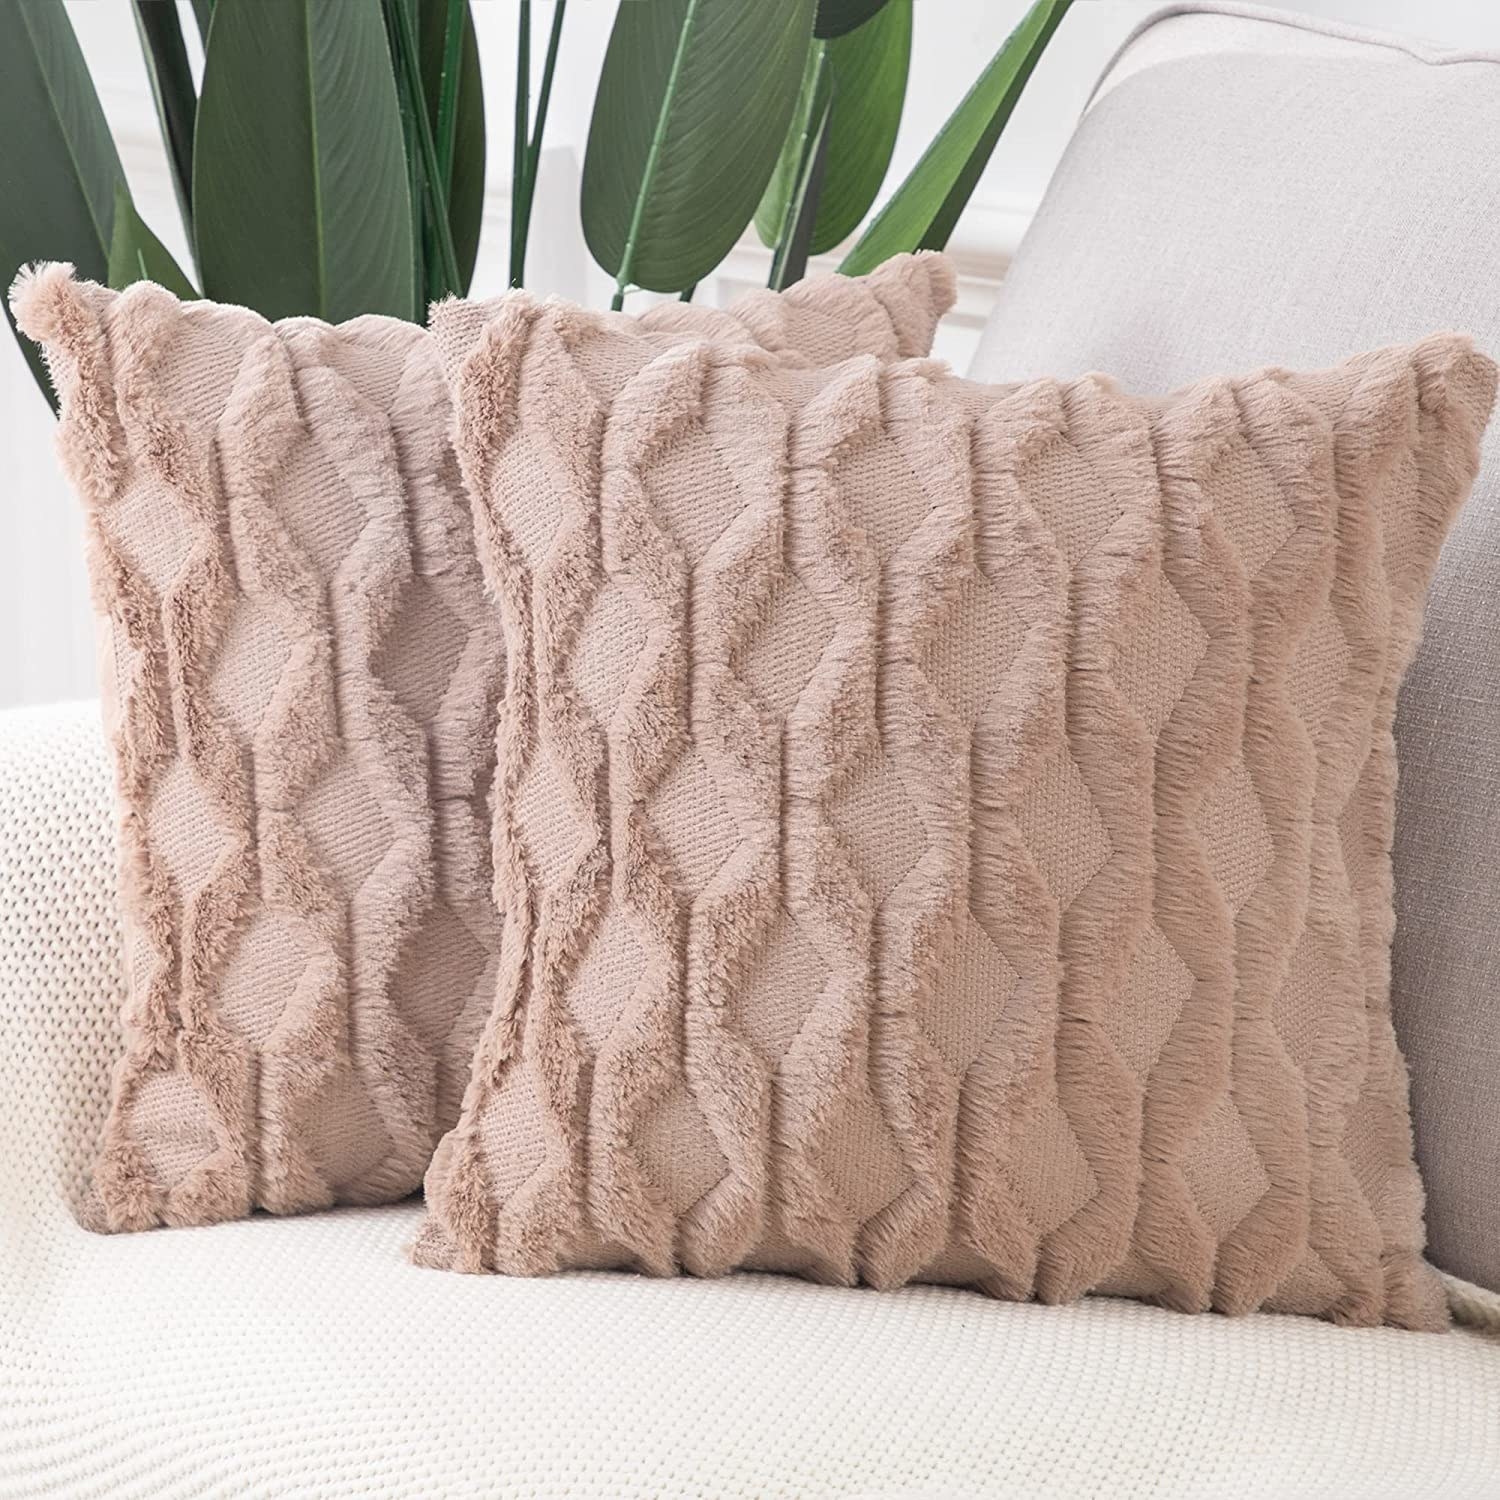 Two light pink pillows on a sofa